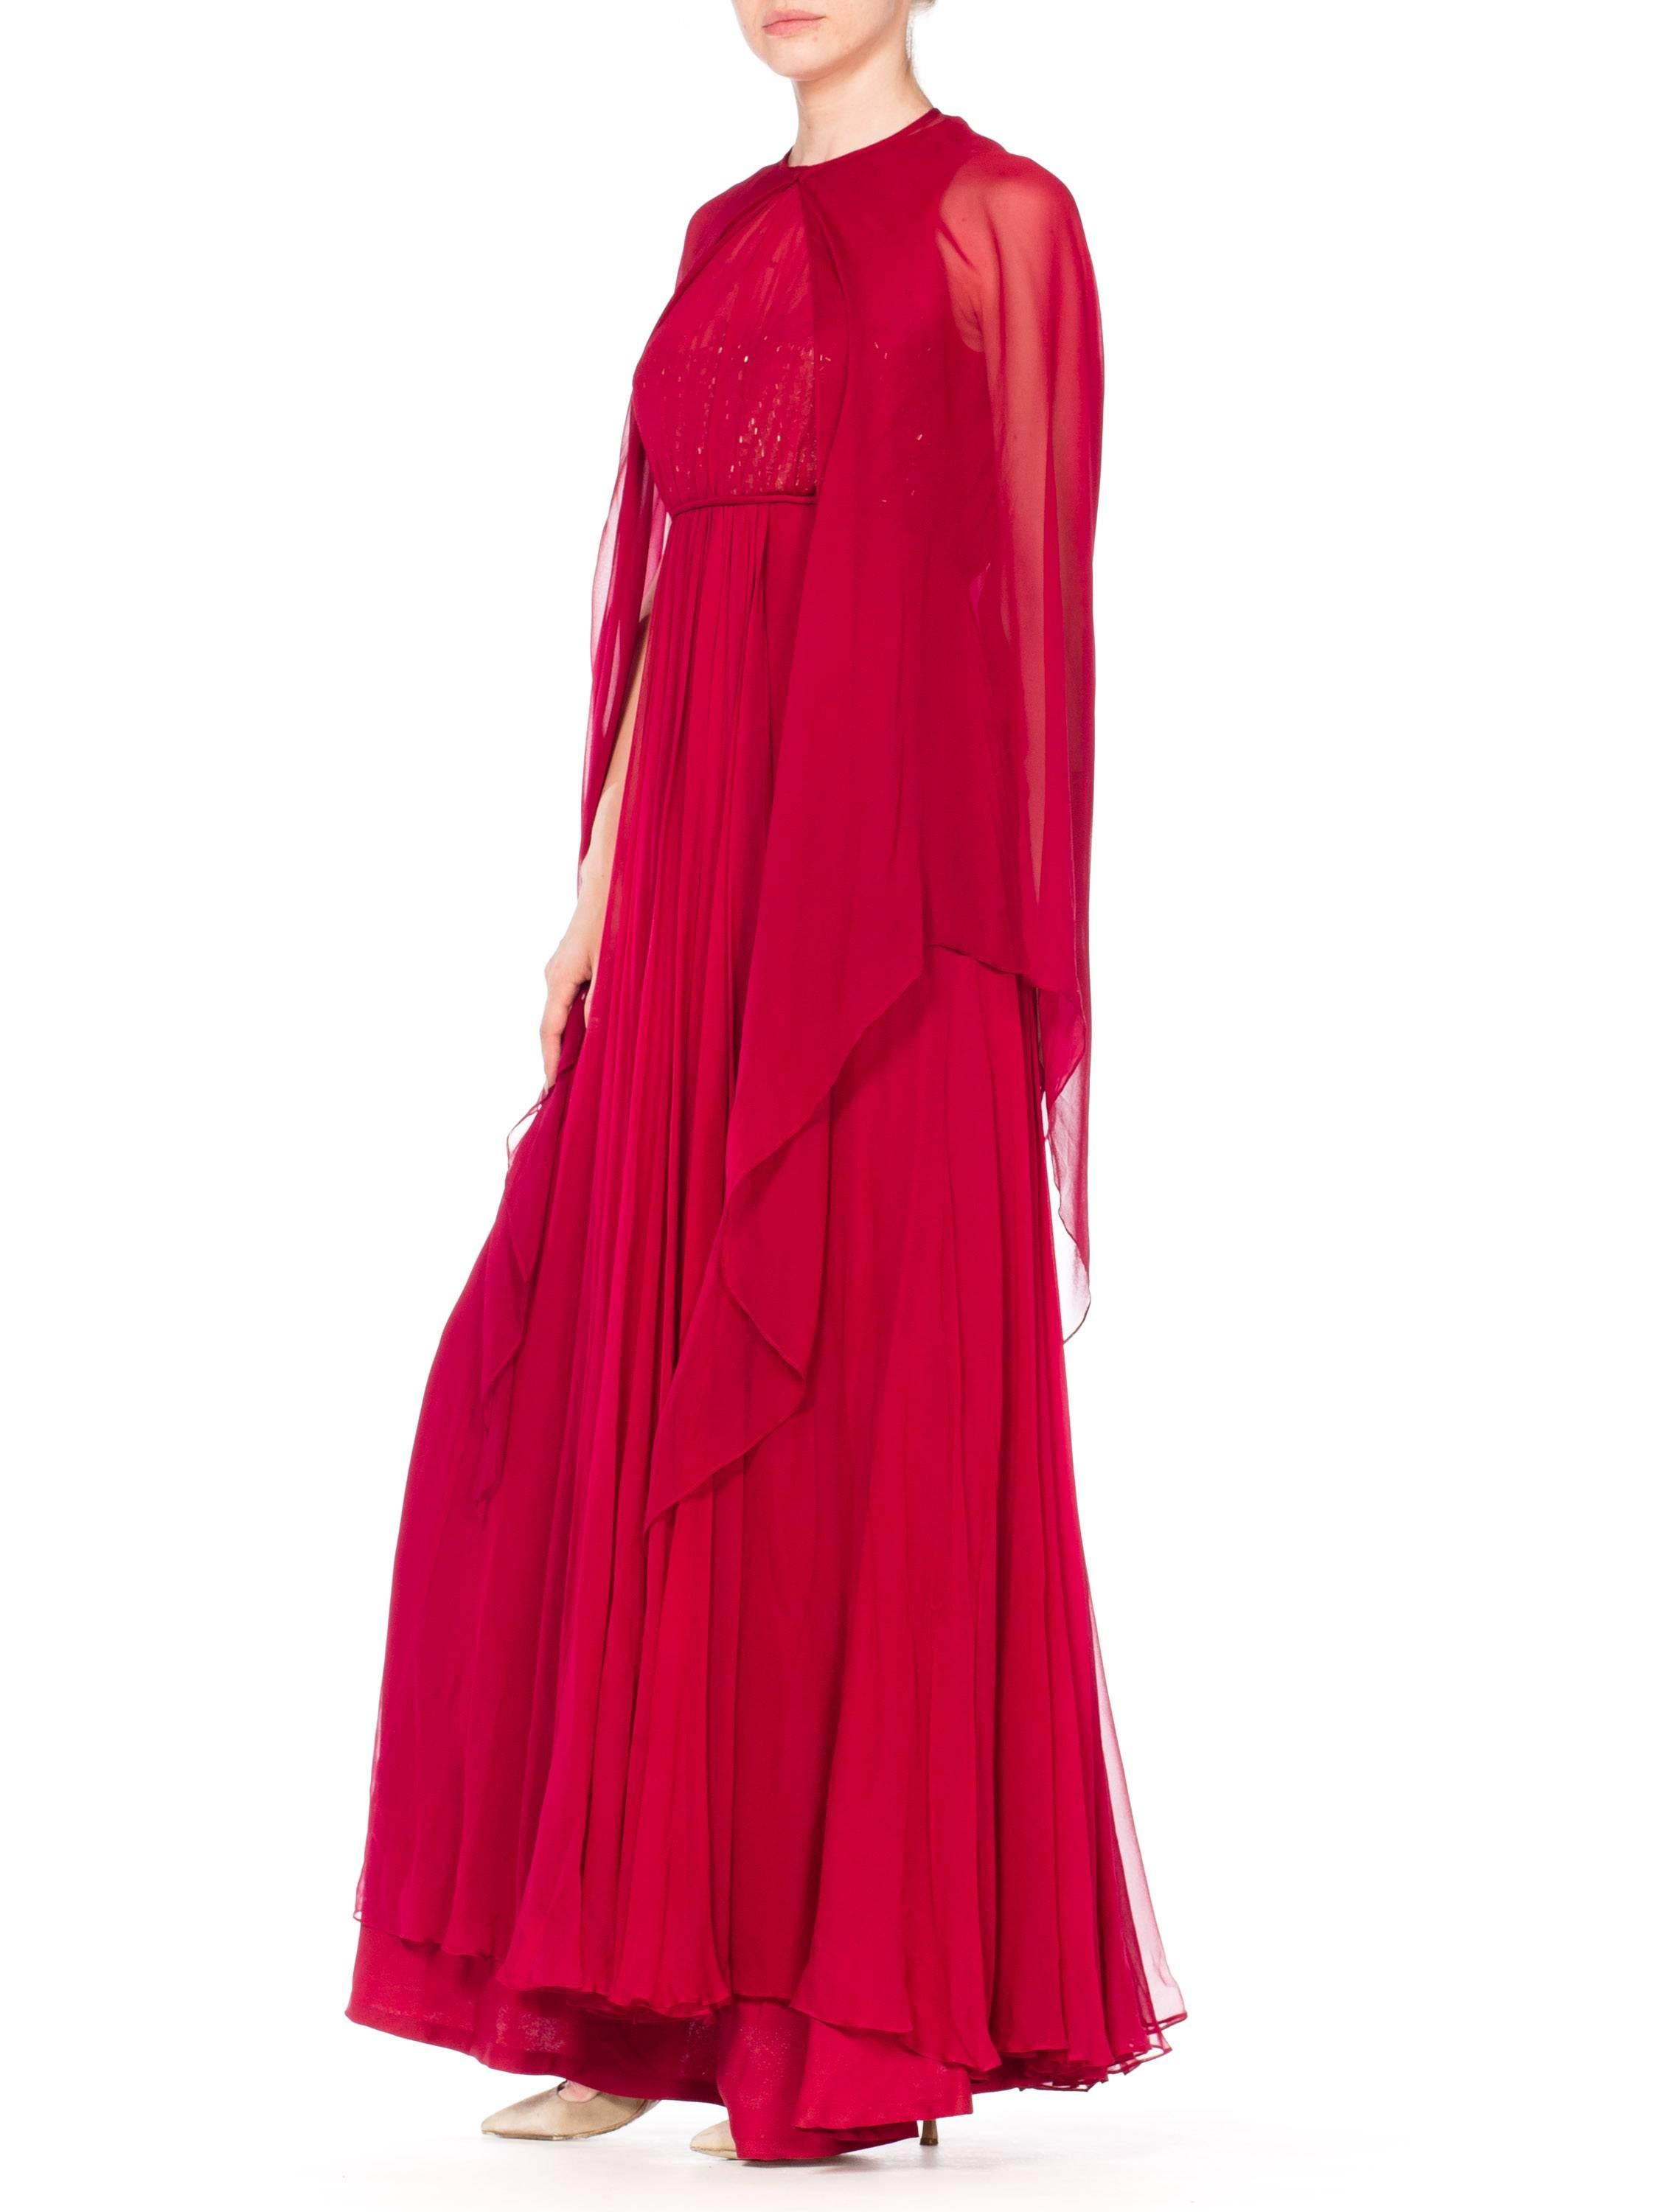 1970S ALFRED BOSAND Cranberry Red Beaded Silk Chiffon Demi Empire Waist Gown Wi For Sale 3